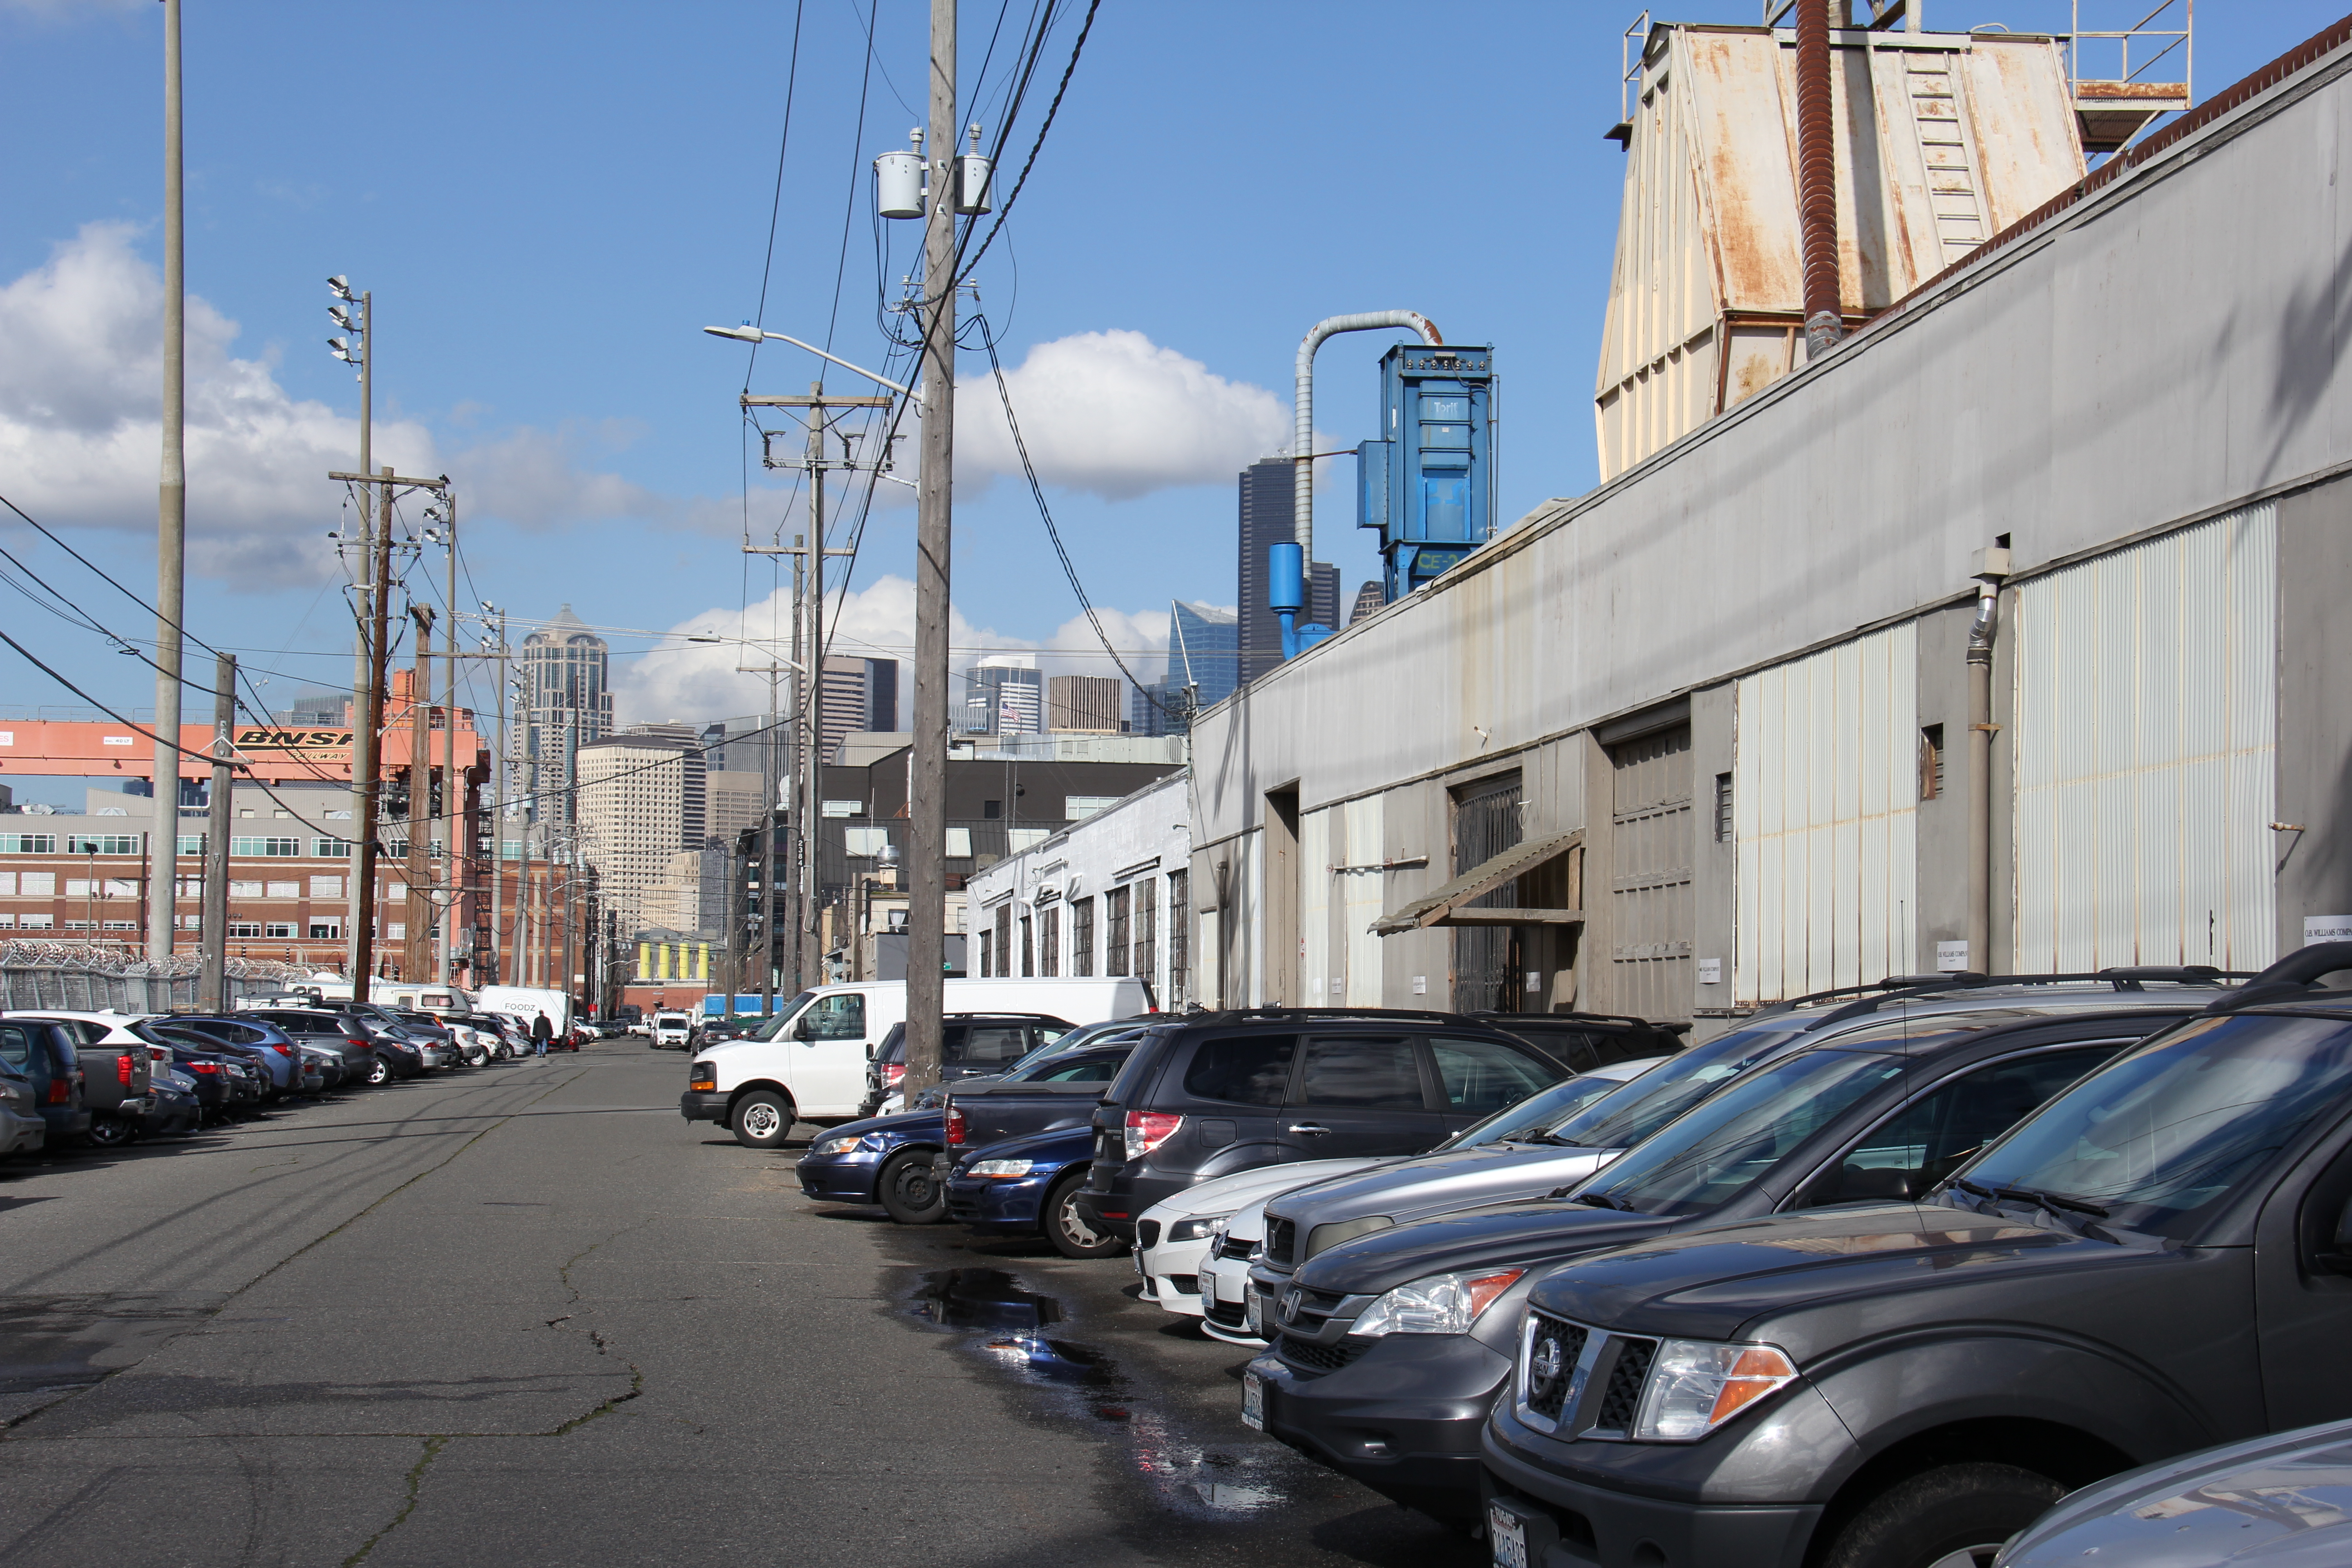 Parked cars pack the rights of way off Utah Avenue, south of Holgate Street, in Seattle's SODO neighborhood